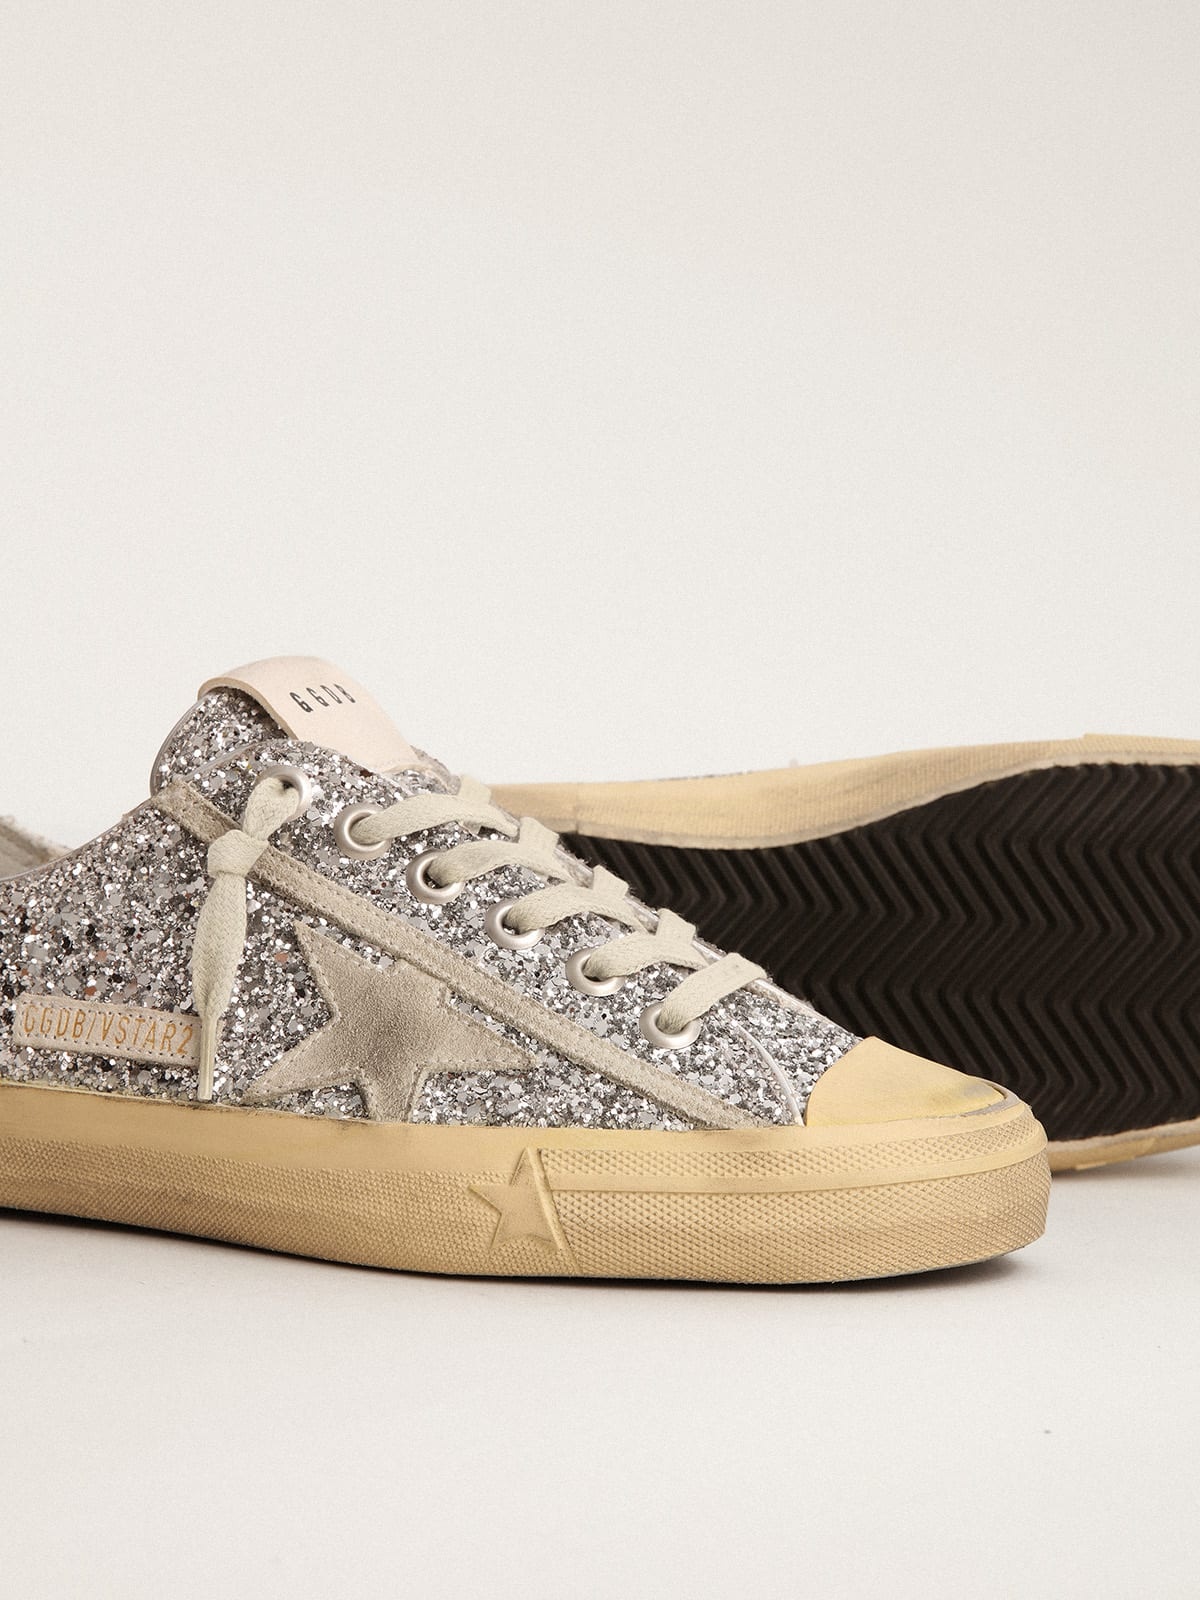 V-Star LTD sneakers in silver glitter with ice-gray suede star - 4